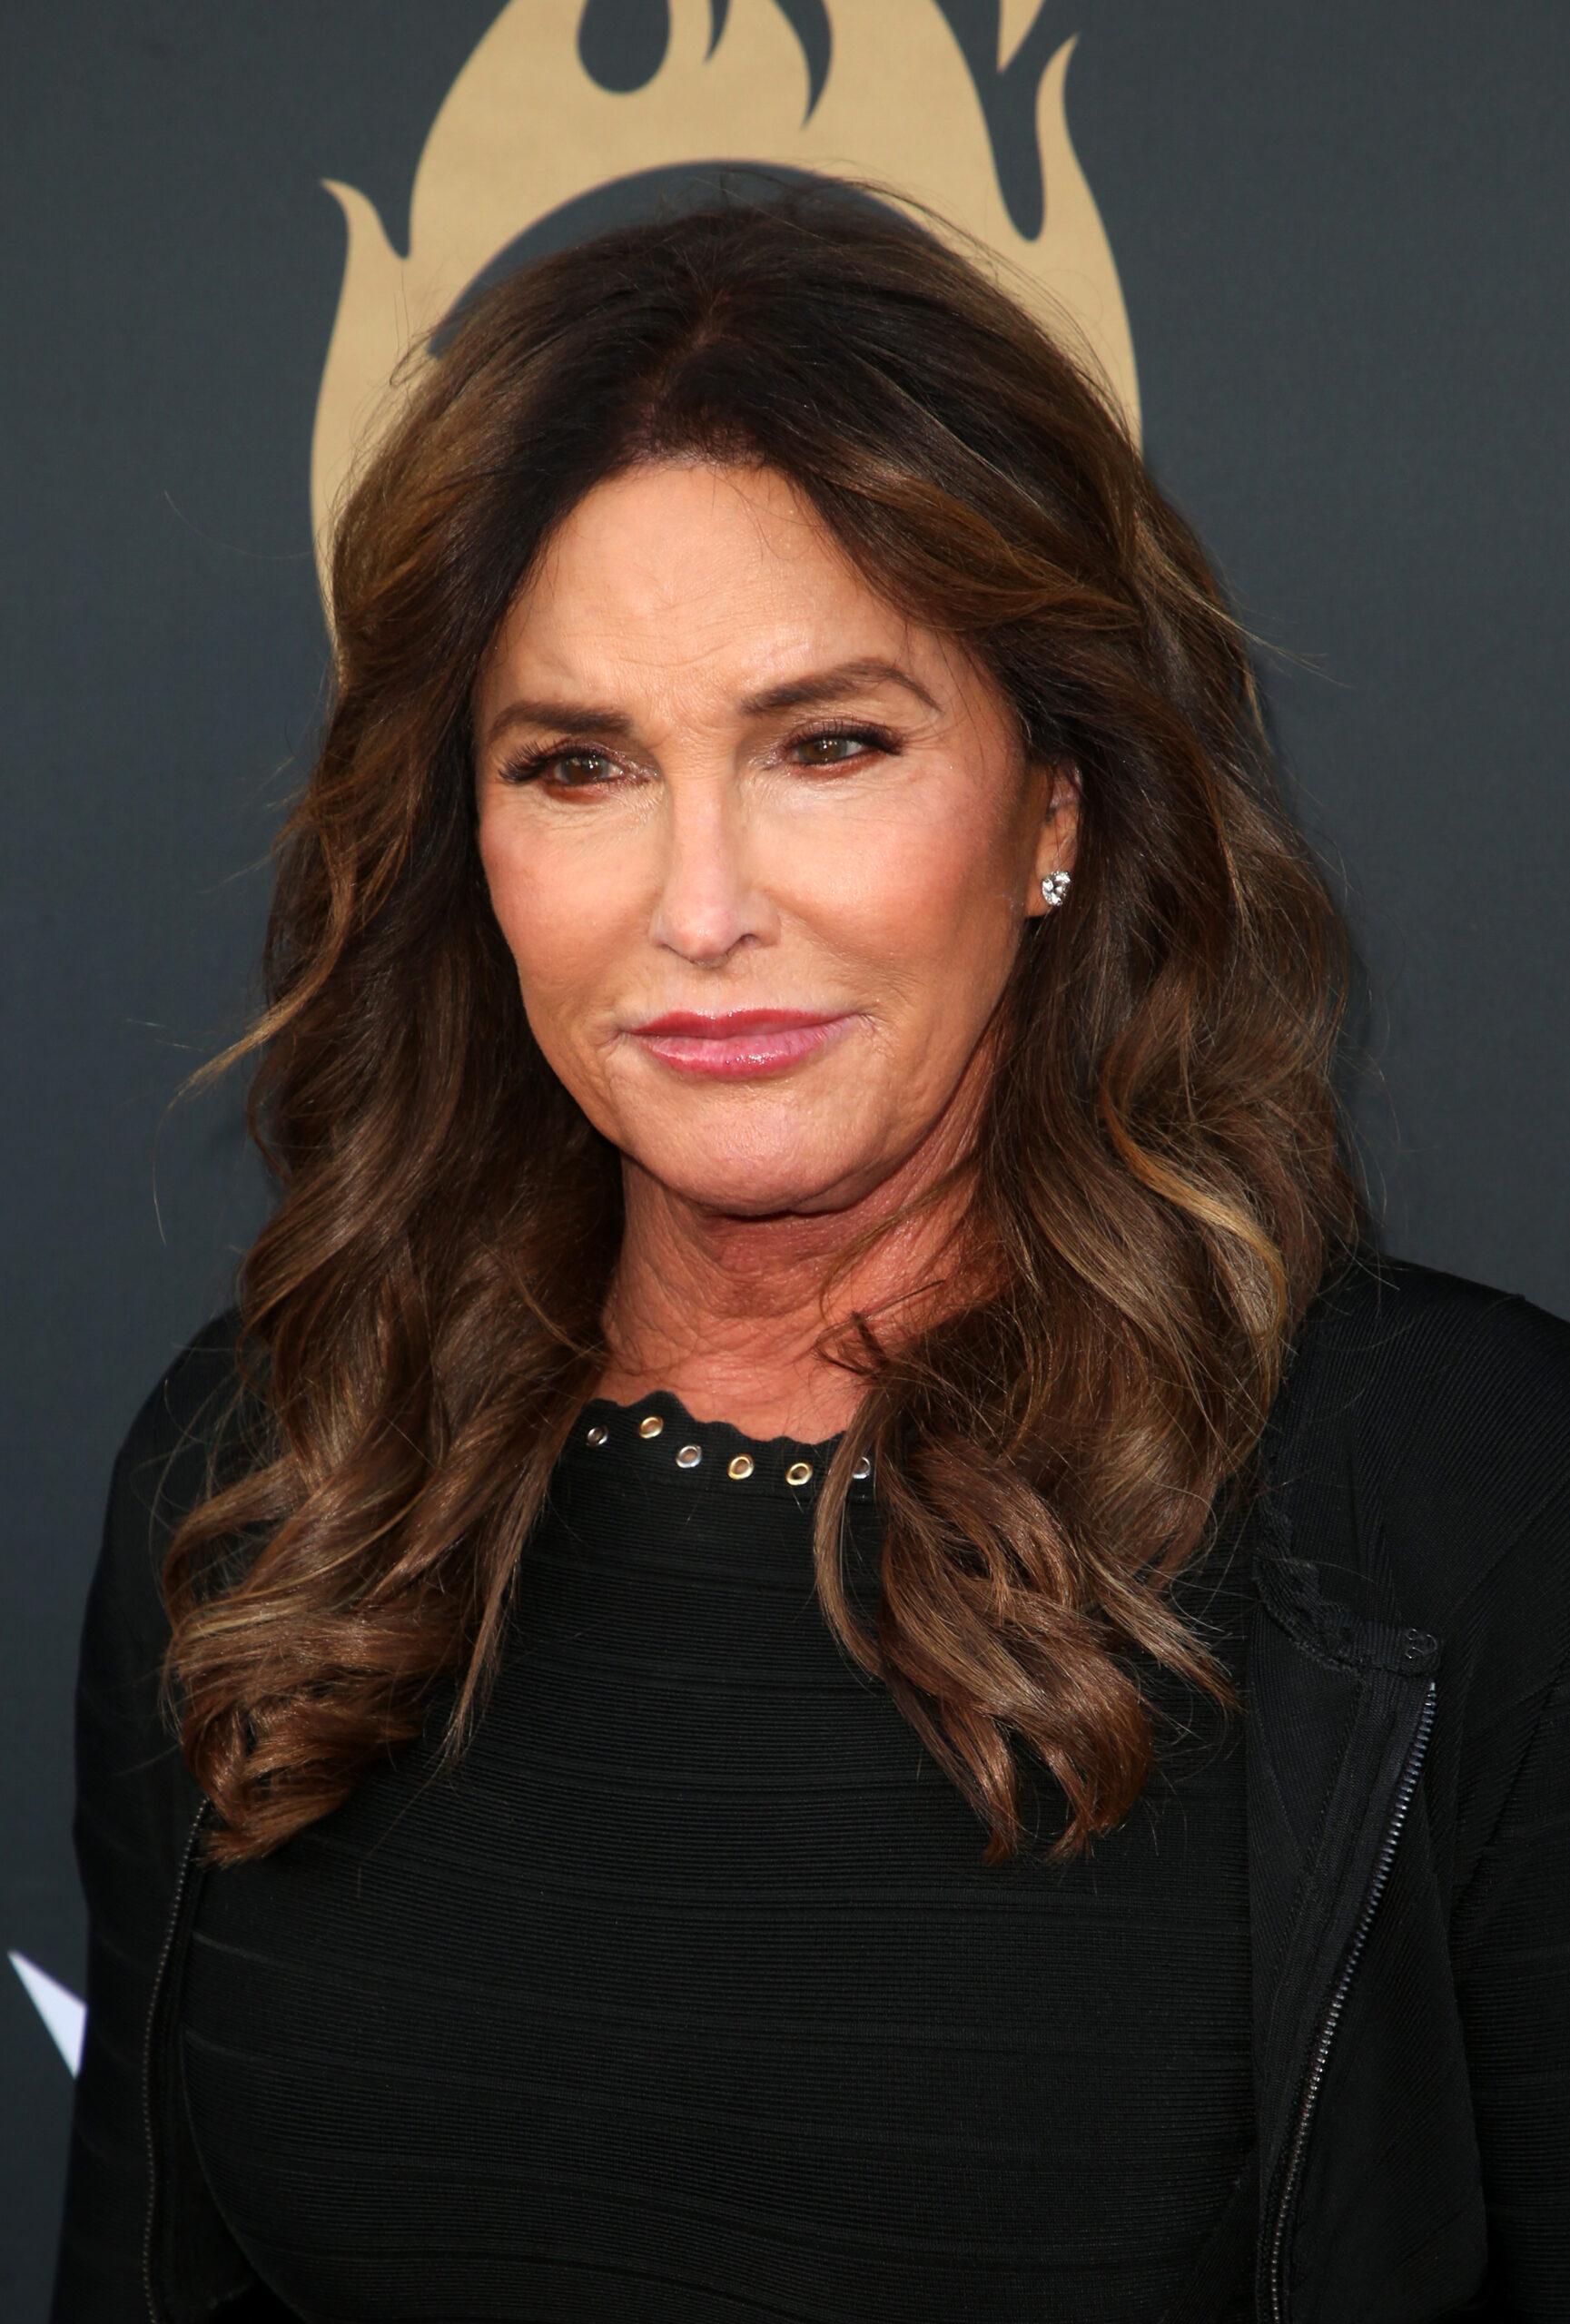 Caitlyn Jenner at Comedy Central Roast Of Alec Baldwin